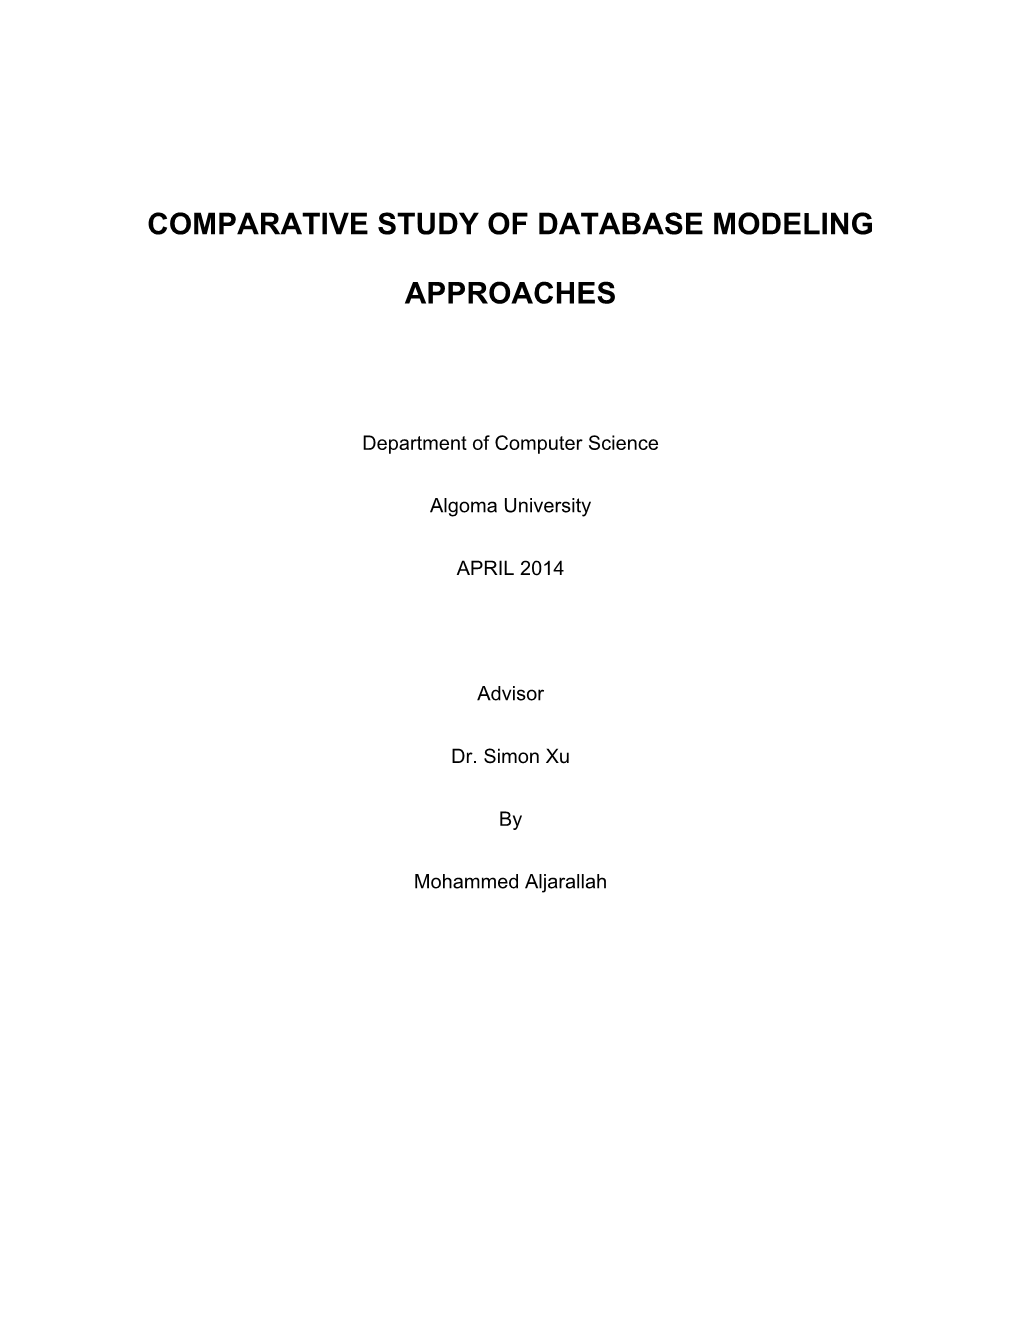 Comparative Study of Database Modeling Approaches